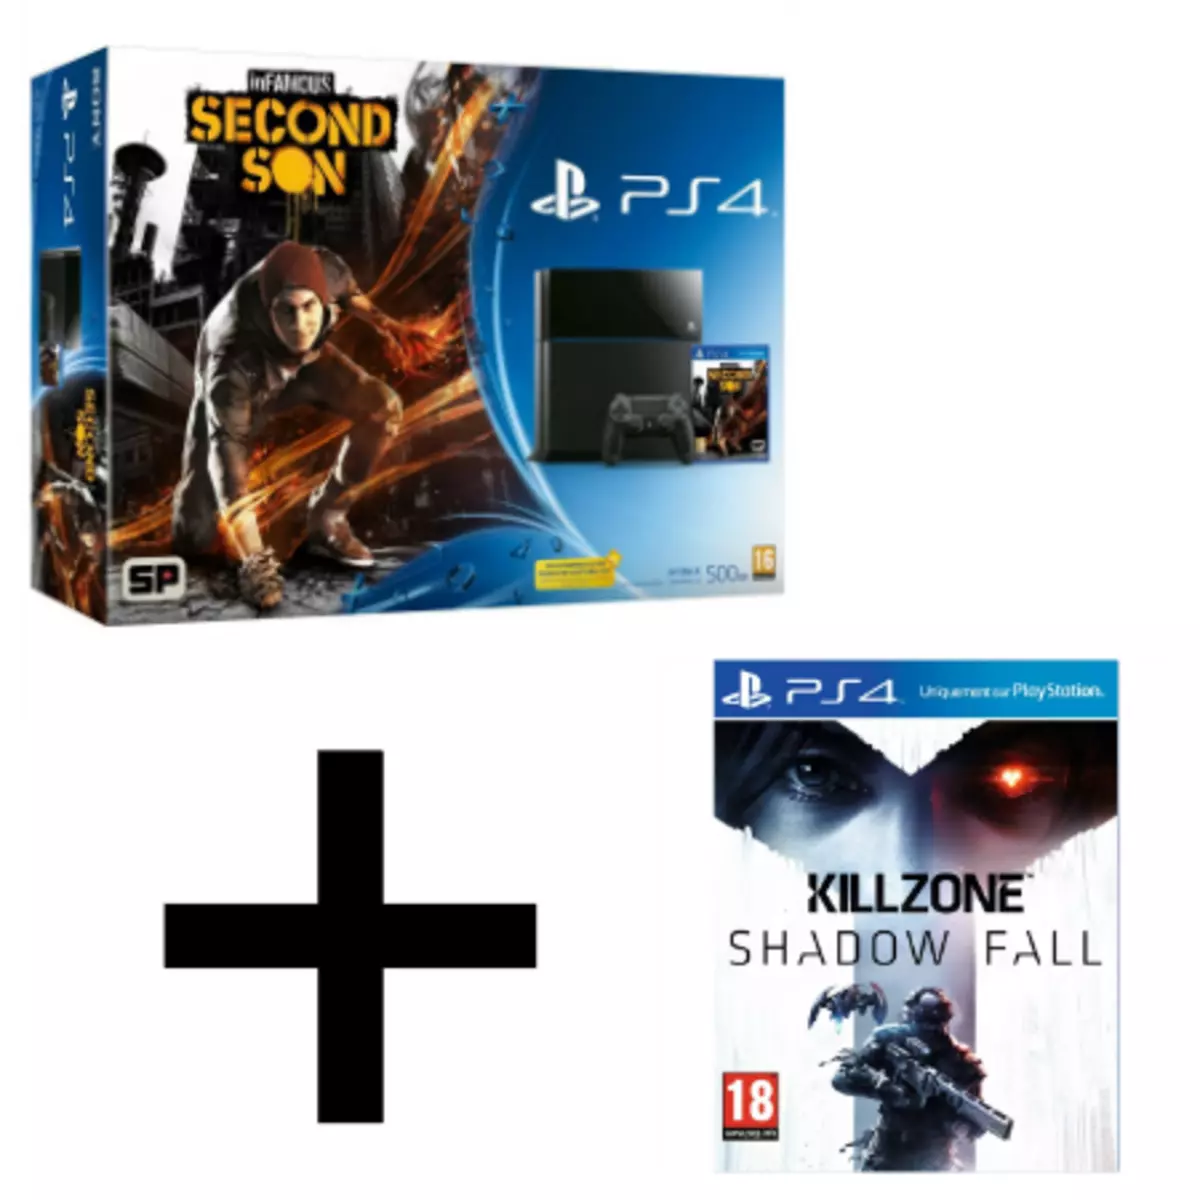 Console PS4 iNFAMOUS + Killzone offert